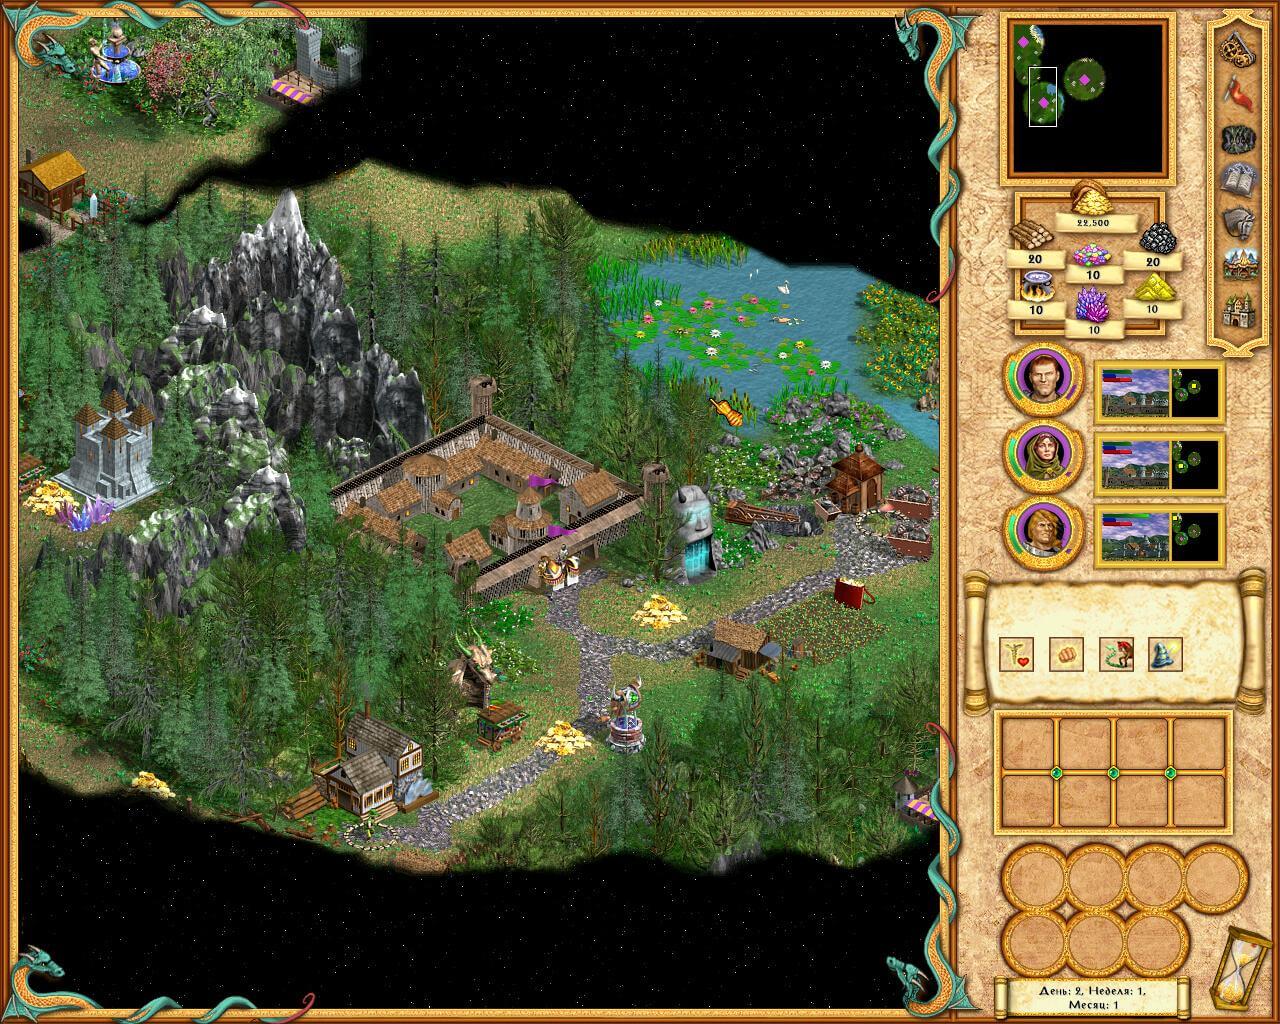 heroes might and magic 3 download free